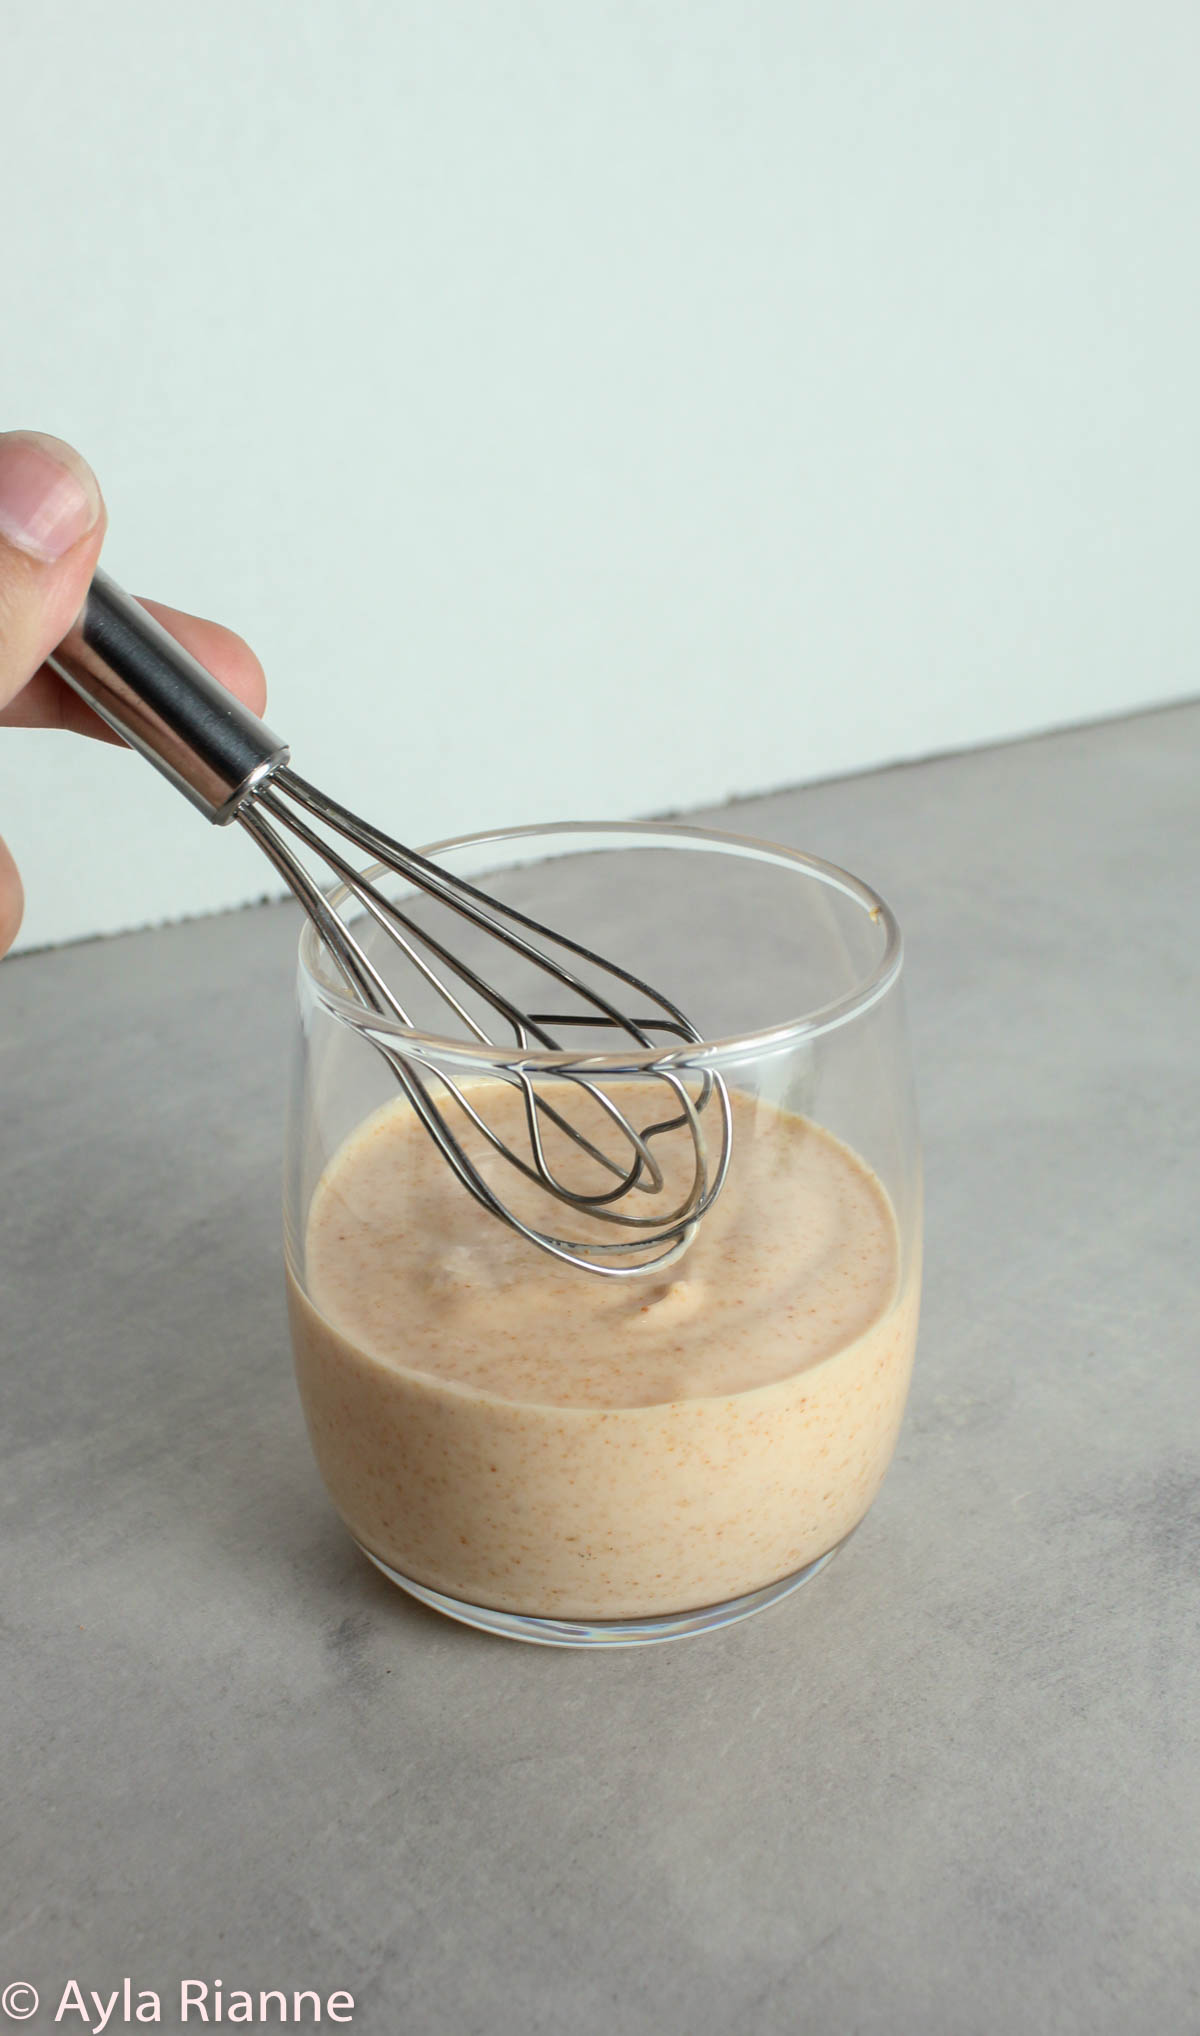 Cup of yum yum sauce with whisk